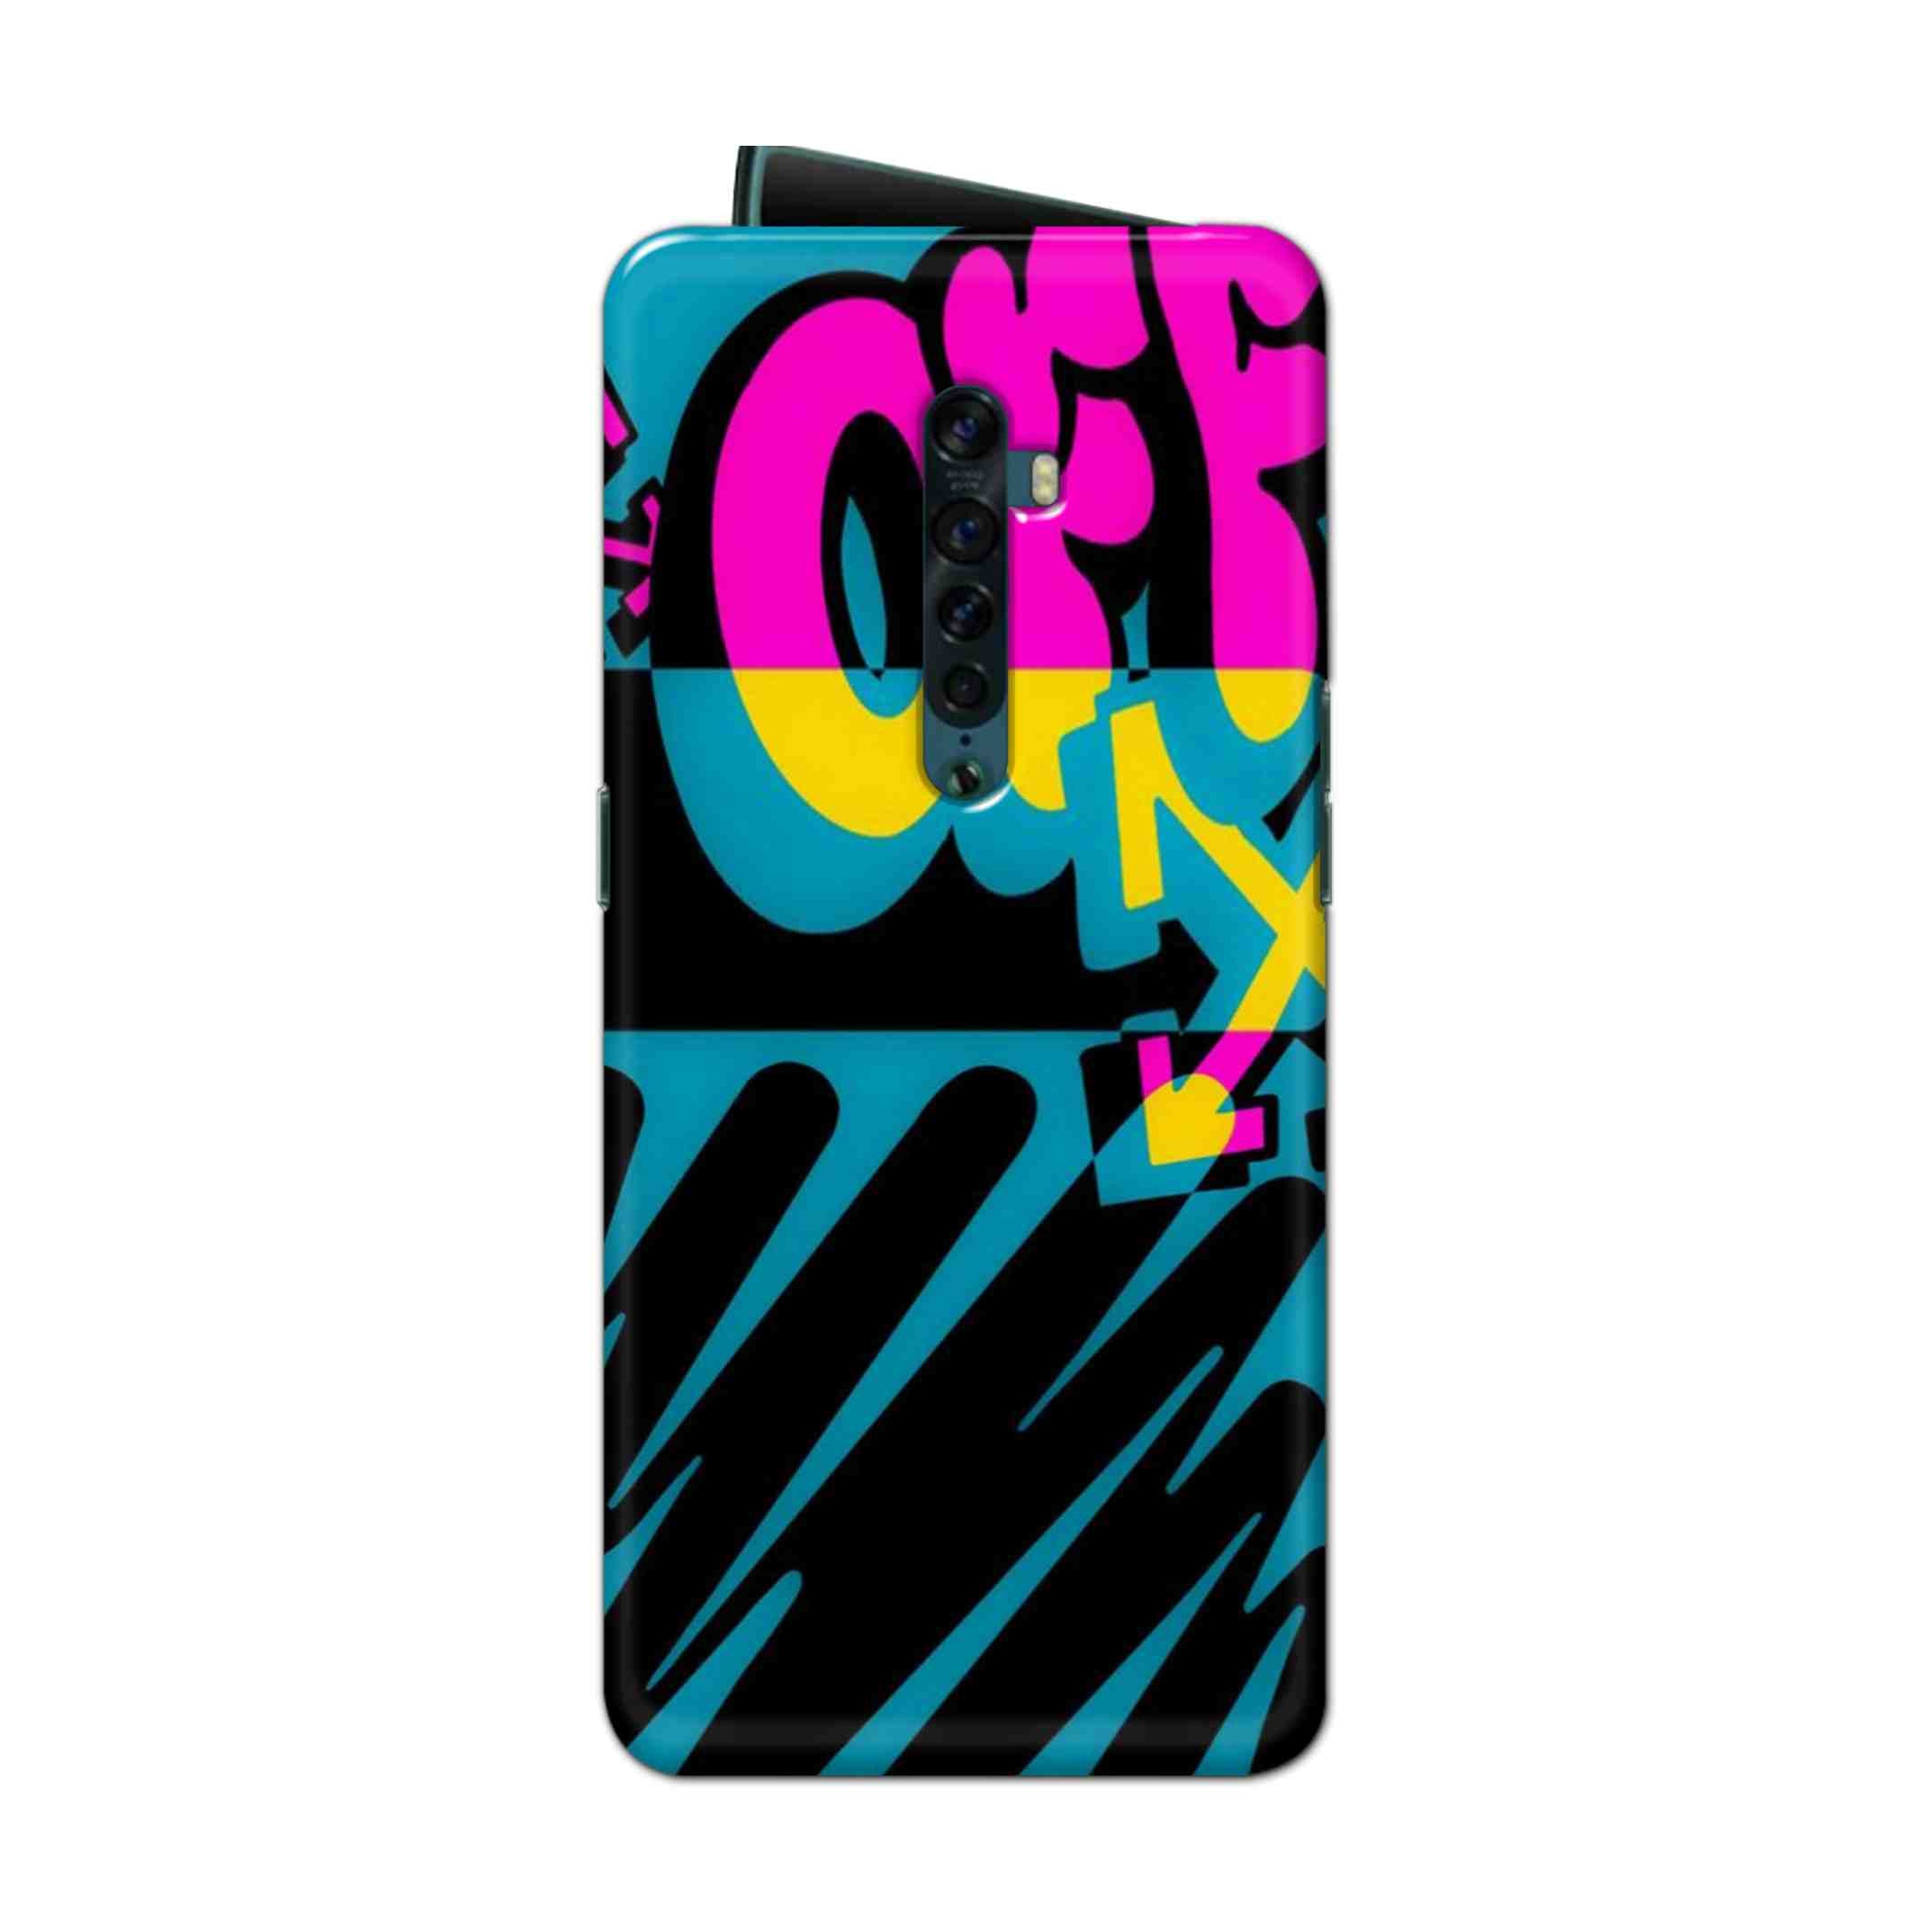 Buy Off Hard Back Mobile Phone Case Cover For Oppo Reno 2 Online